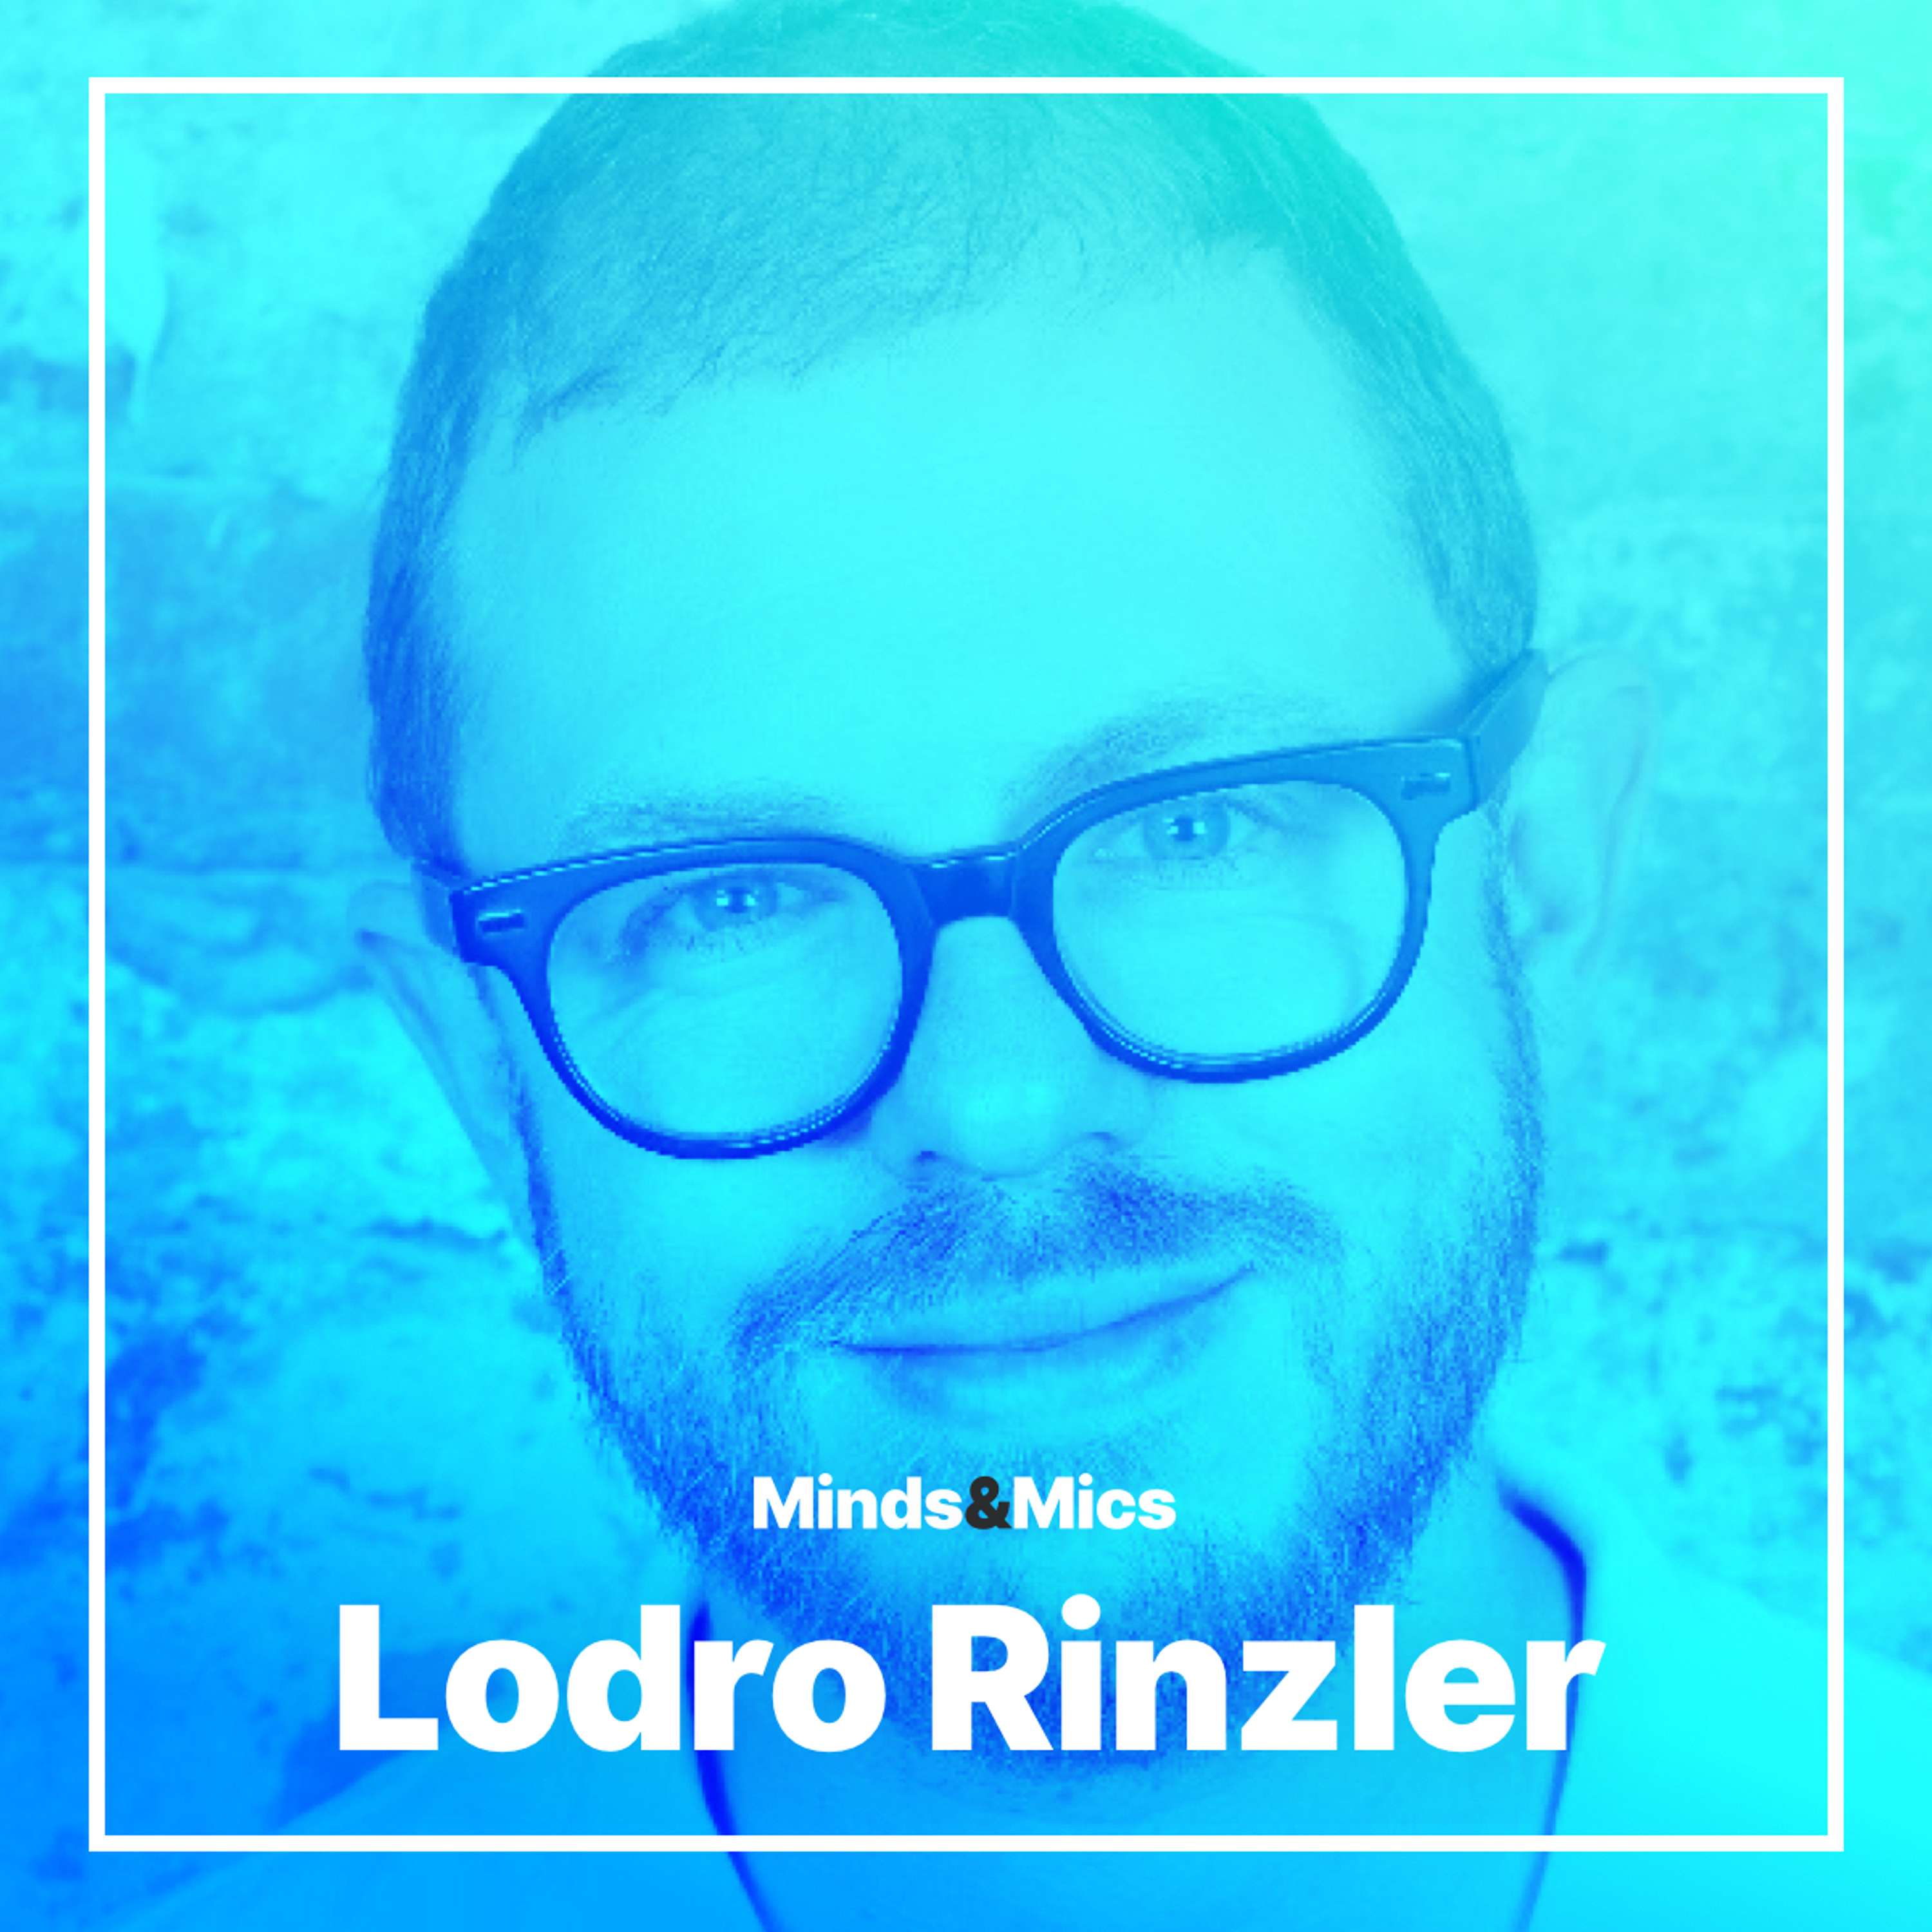 Starting a Meditation Practice with Lodro Rinzler